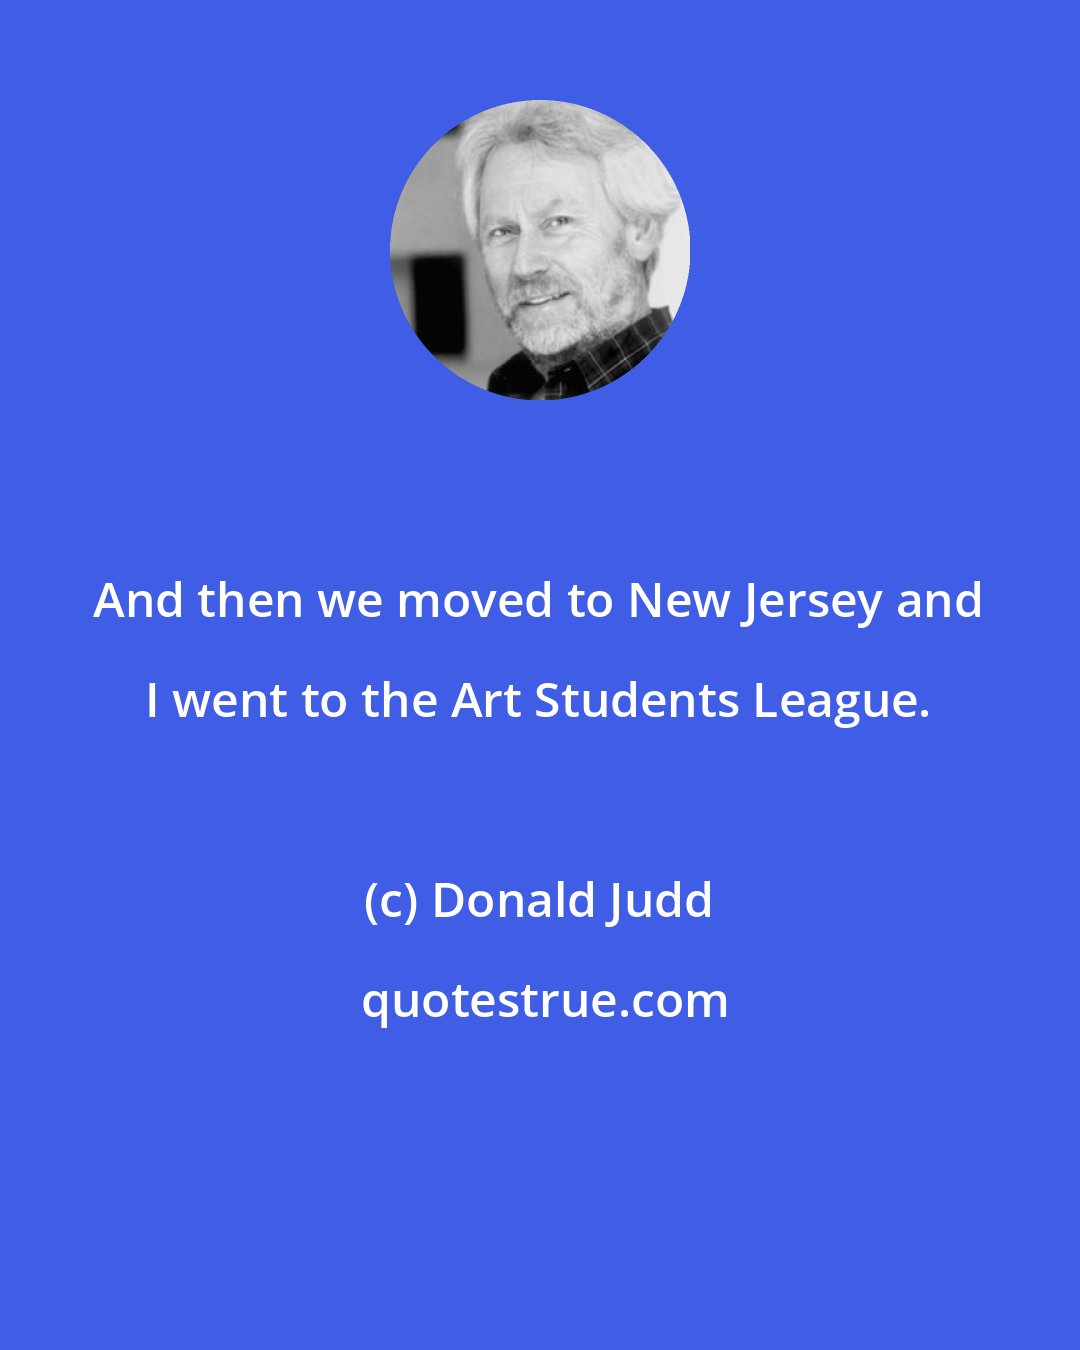 Donald Judd: And then we moved to New Jersey and I went to the Art Students League.